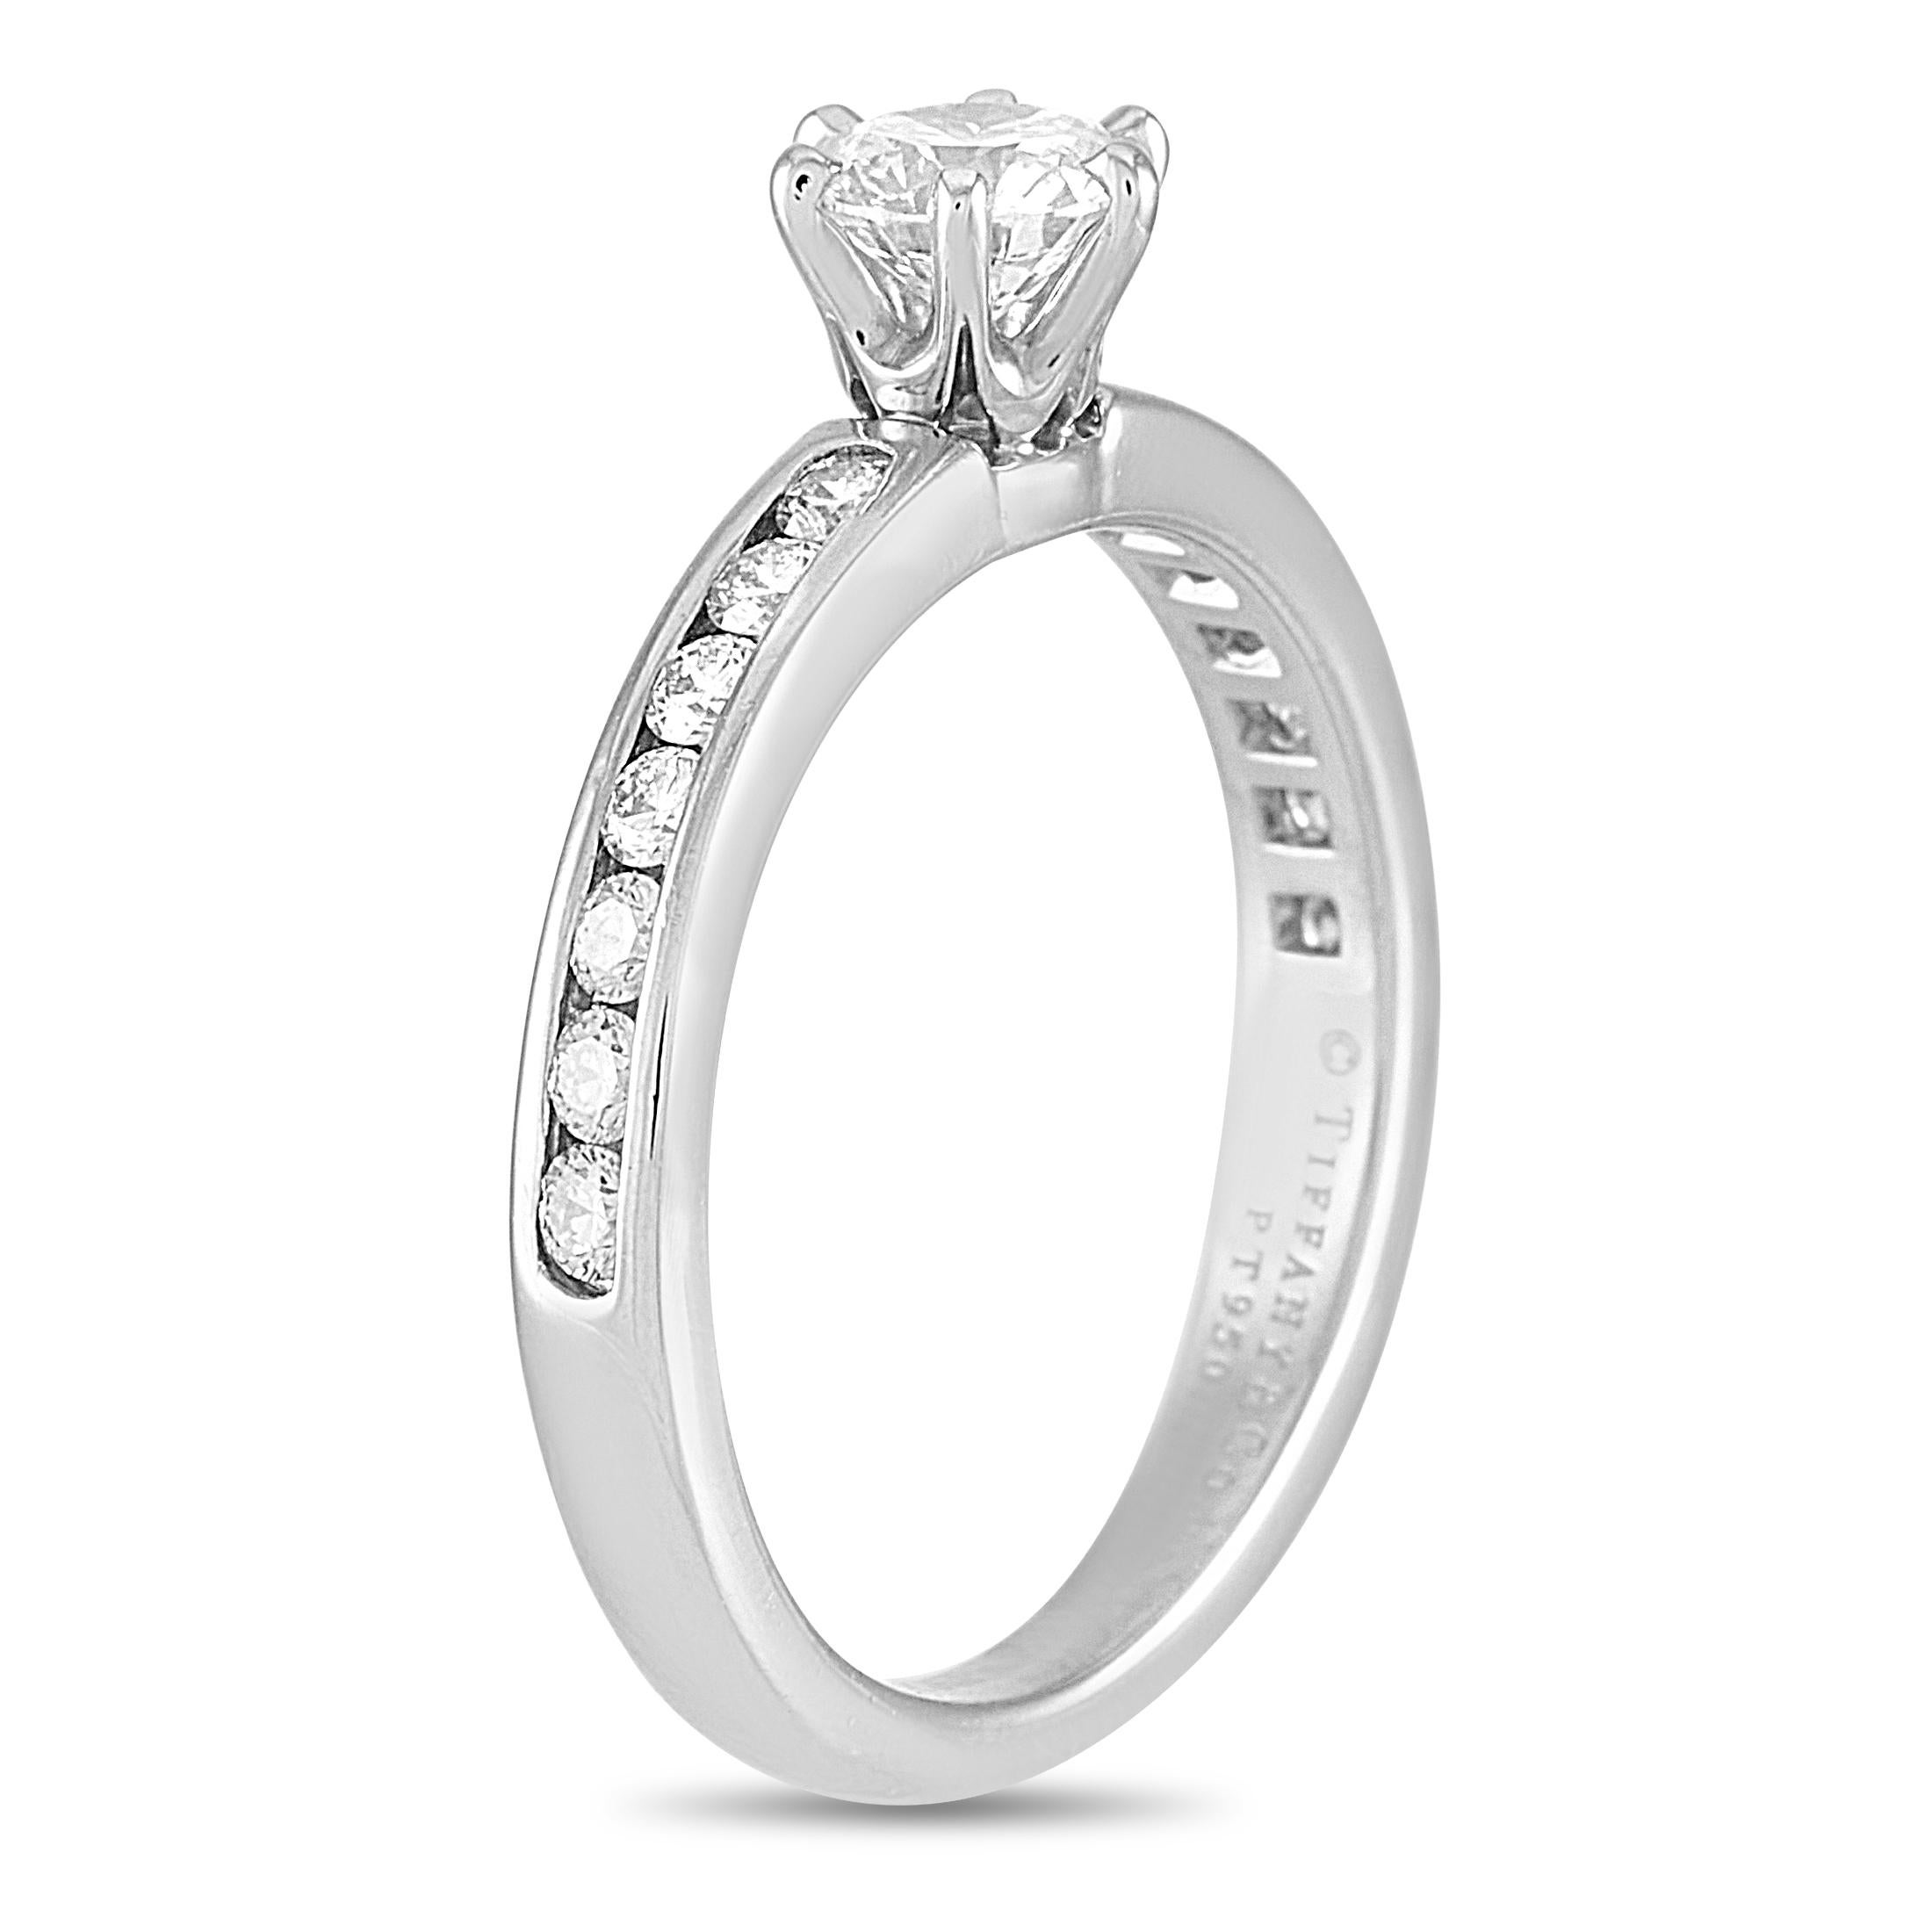 This Tiffany & Co. engagement ring is crafted from platinum and weighs 3.3 grams. It boasts band thickness of 3 mm and top height of 5 mm, while top dimensions measure 5 by 17 mm. The ring is set with a total of 0.54 carats of diamonds – the center